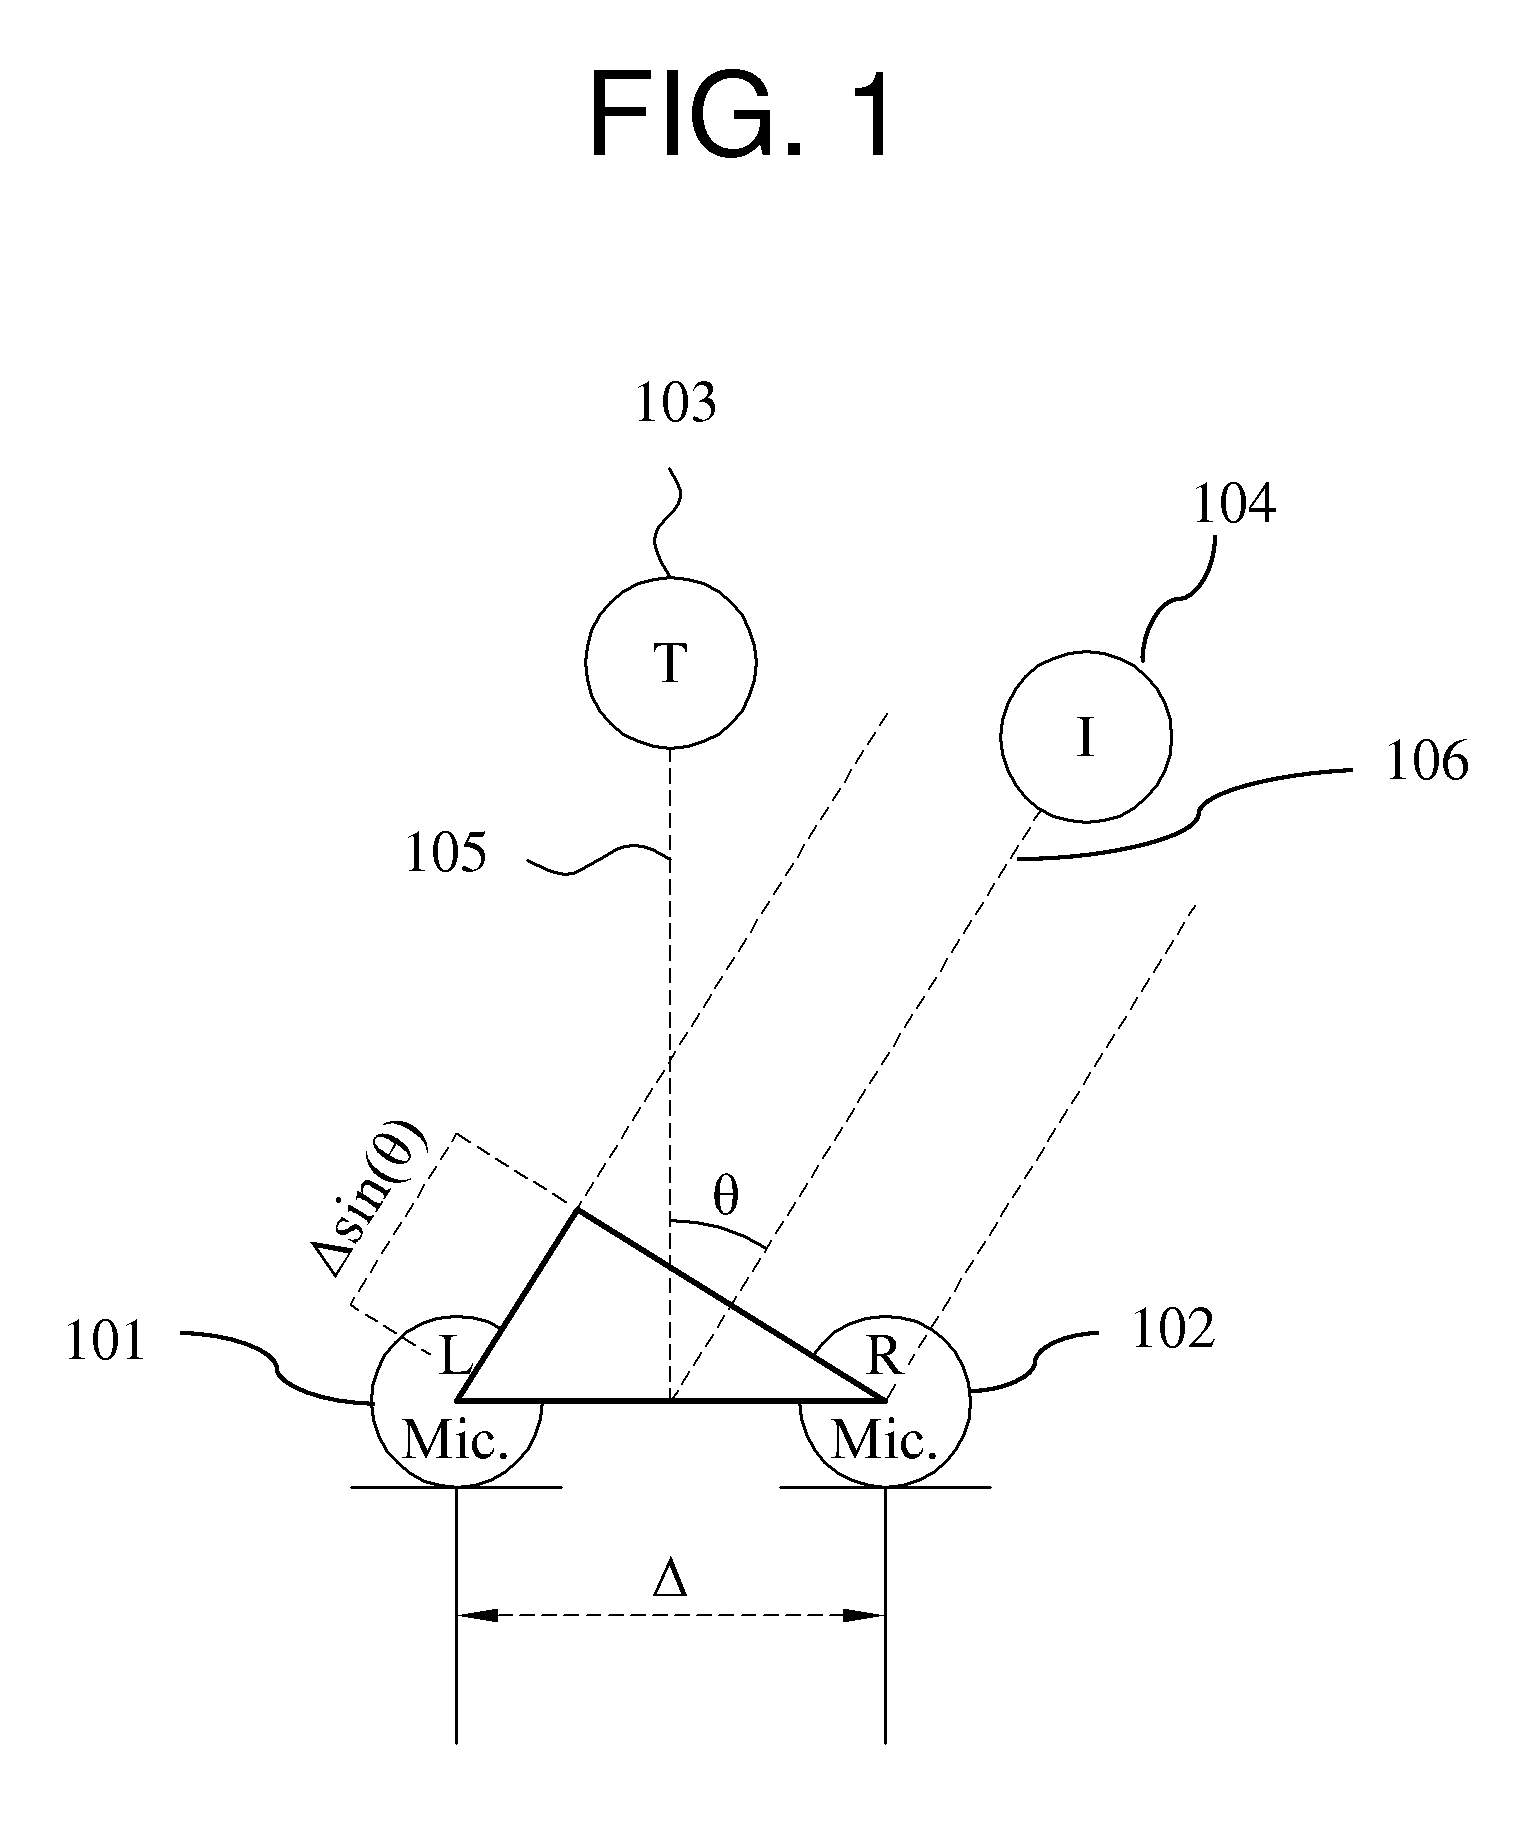 Signal separation system and method for automatically selecting threshold to separate sound sources